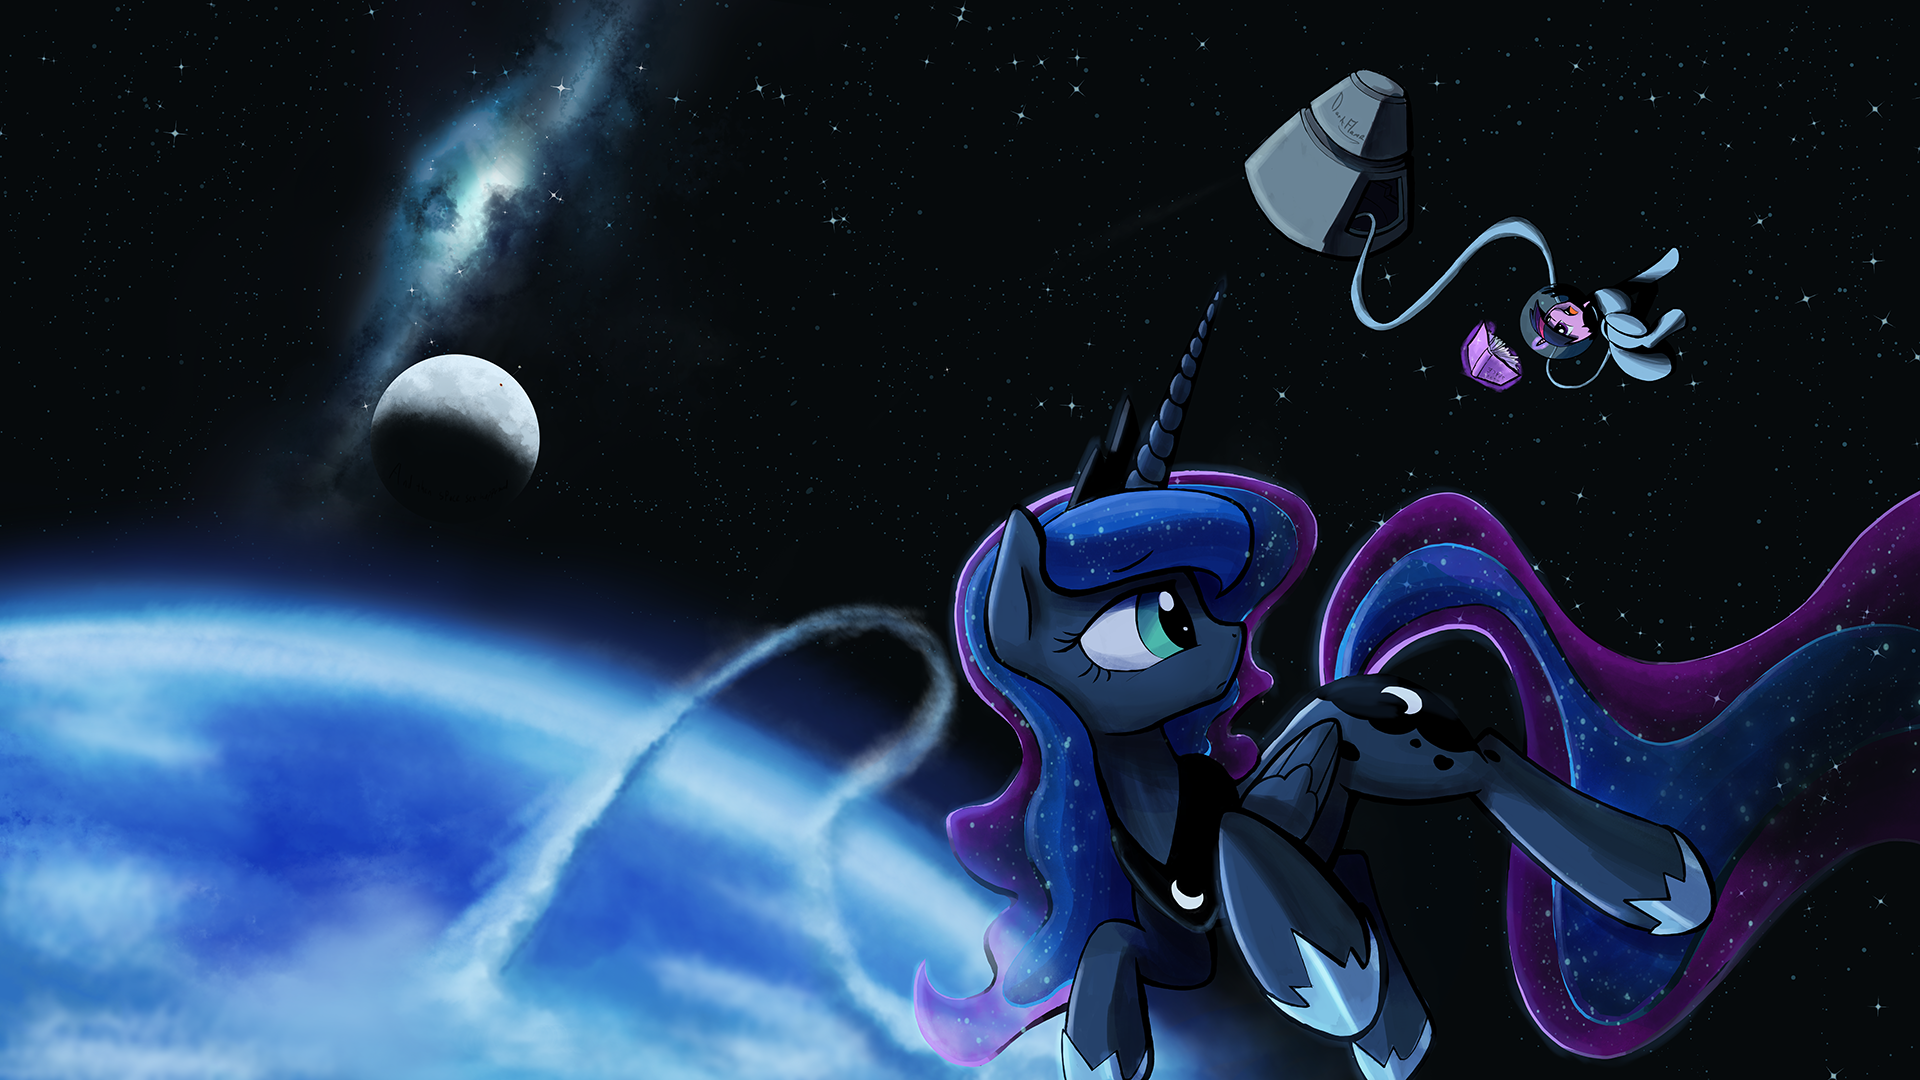 Just a quick space stroll by DarkFlame75